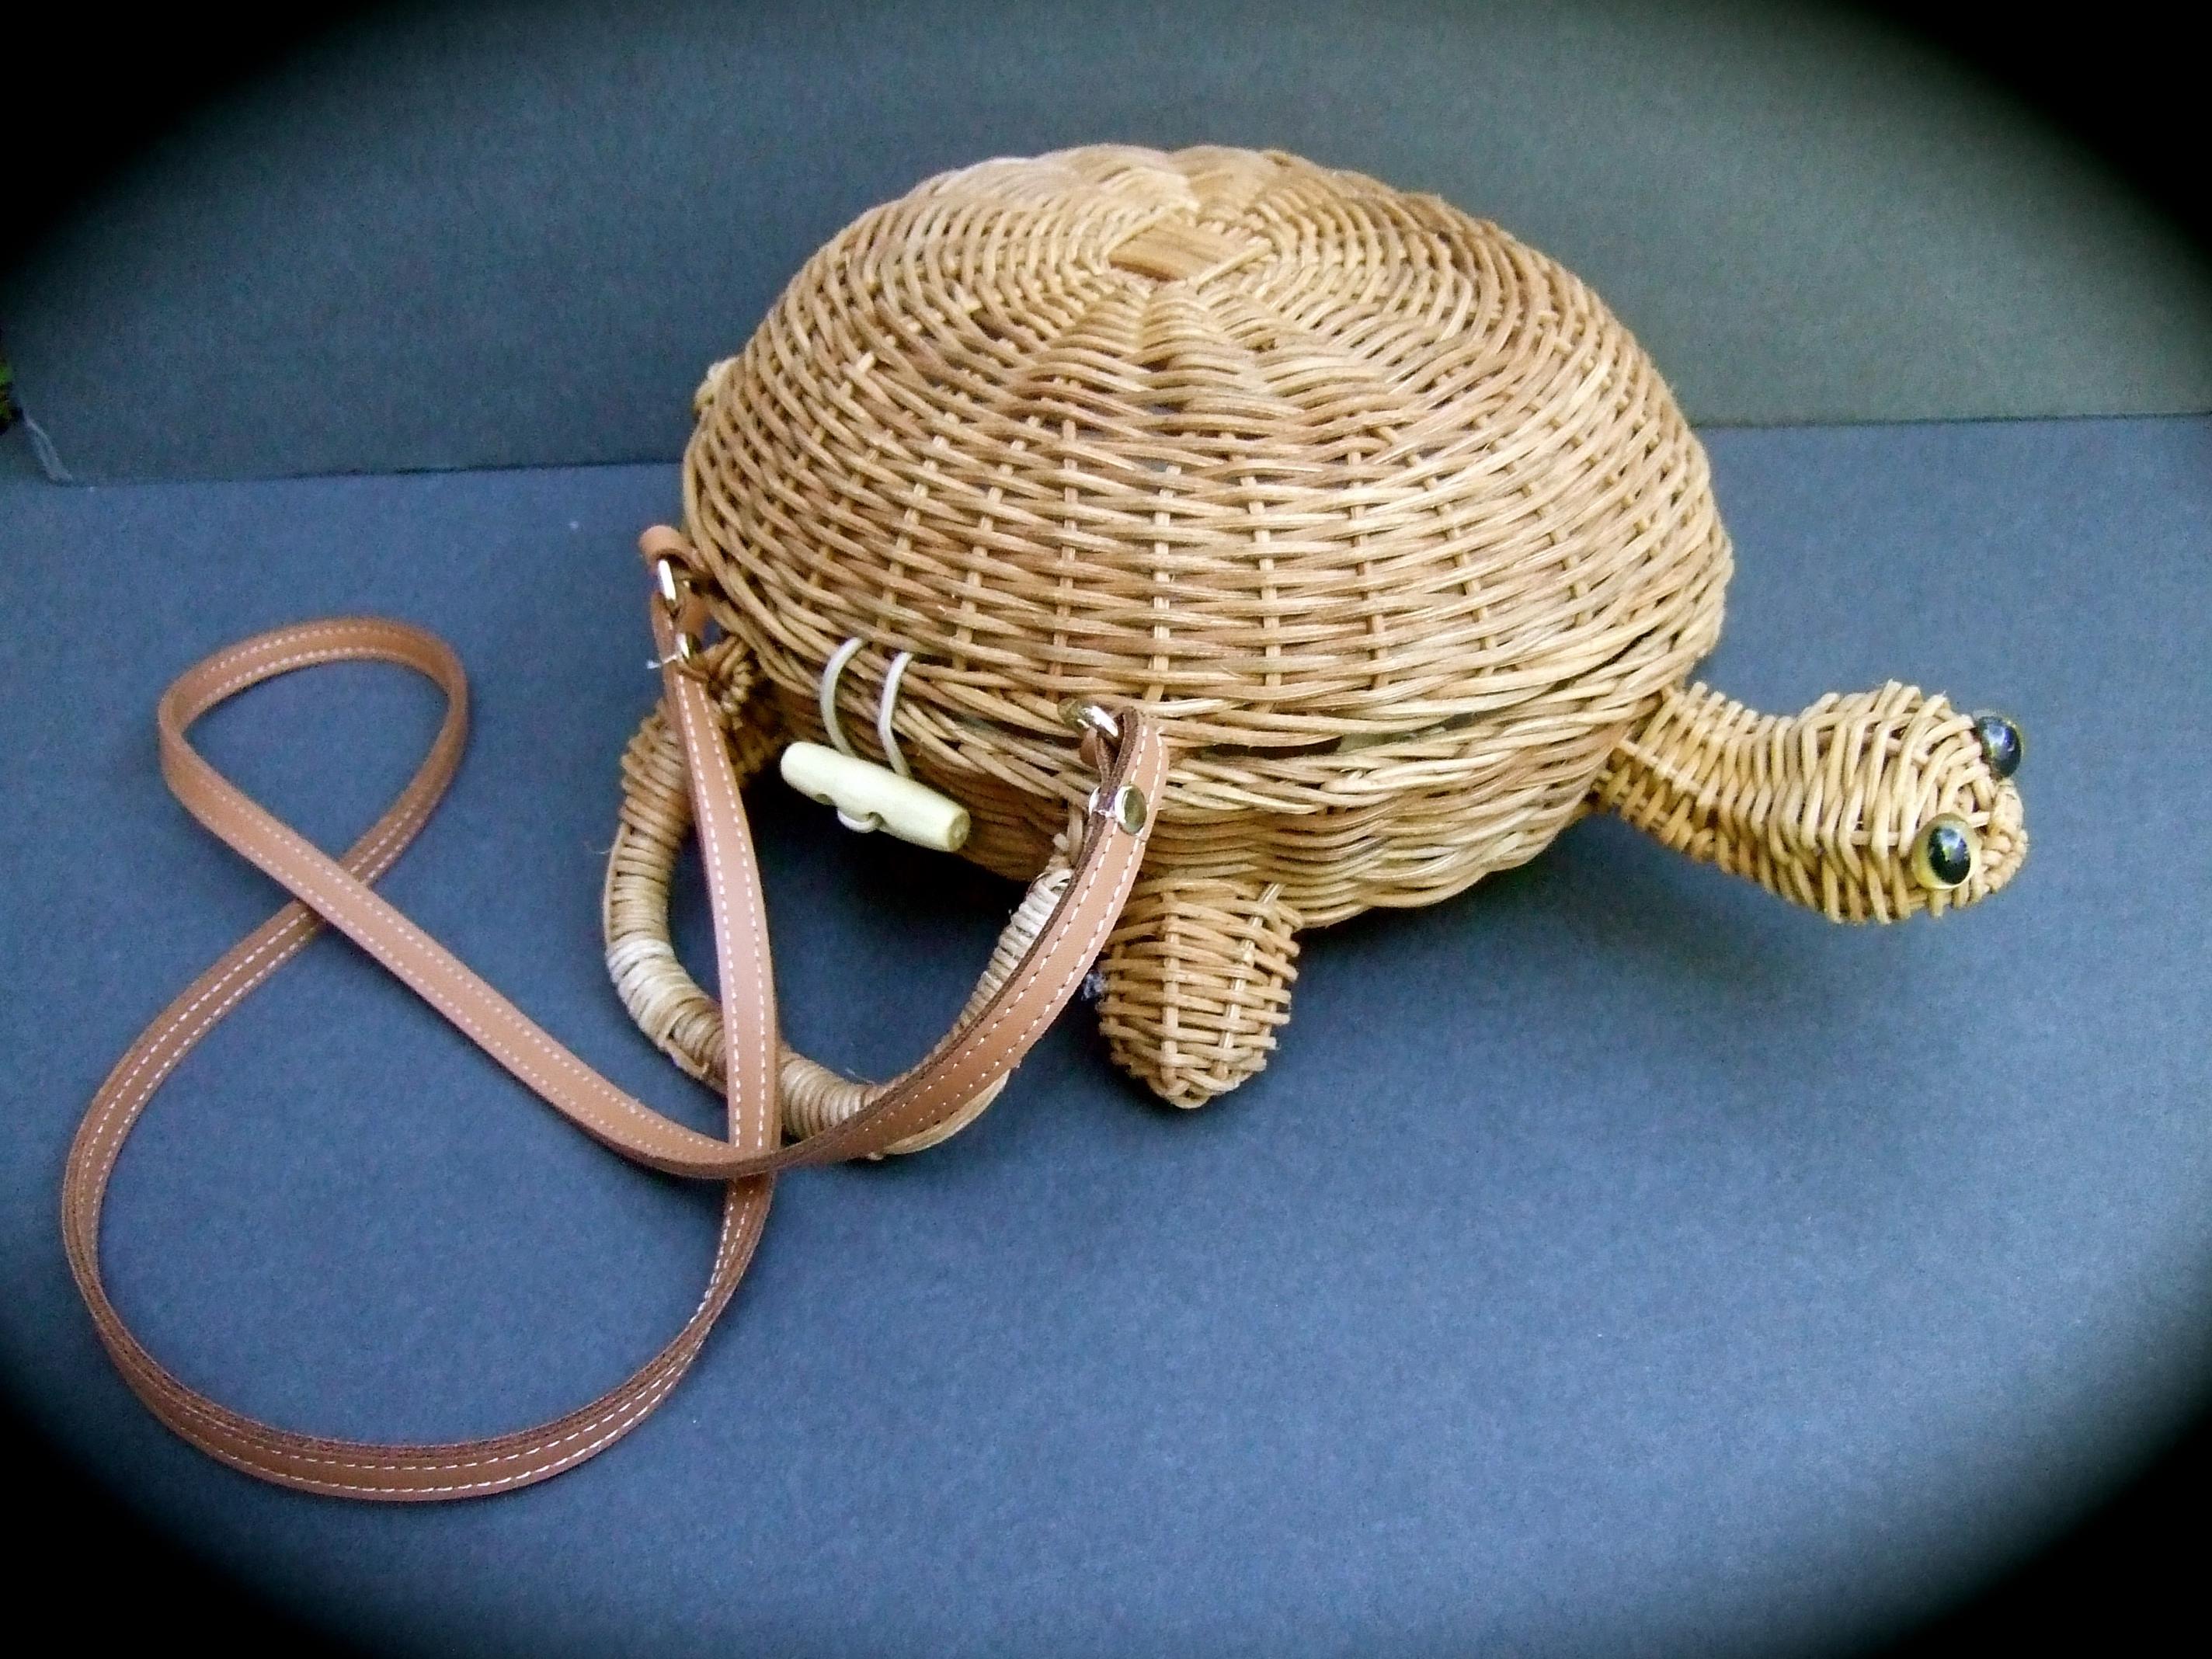 Charming woven wicker turtle design versatile handbag - shoulder bag c 1990s
The unique handwoven artisan handbag is designed with an endearing 
turtle figure. The versatile design may be carried as chic handbag
It too may be carried as a stylish